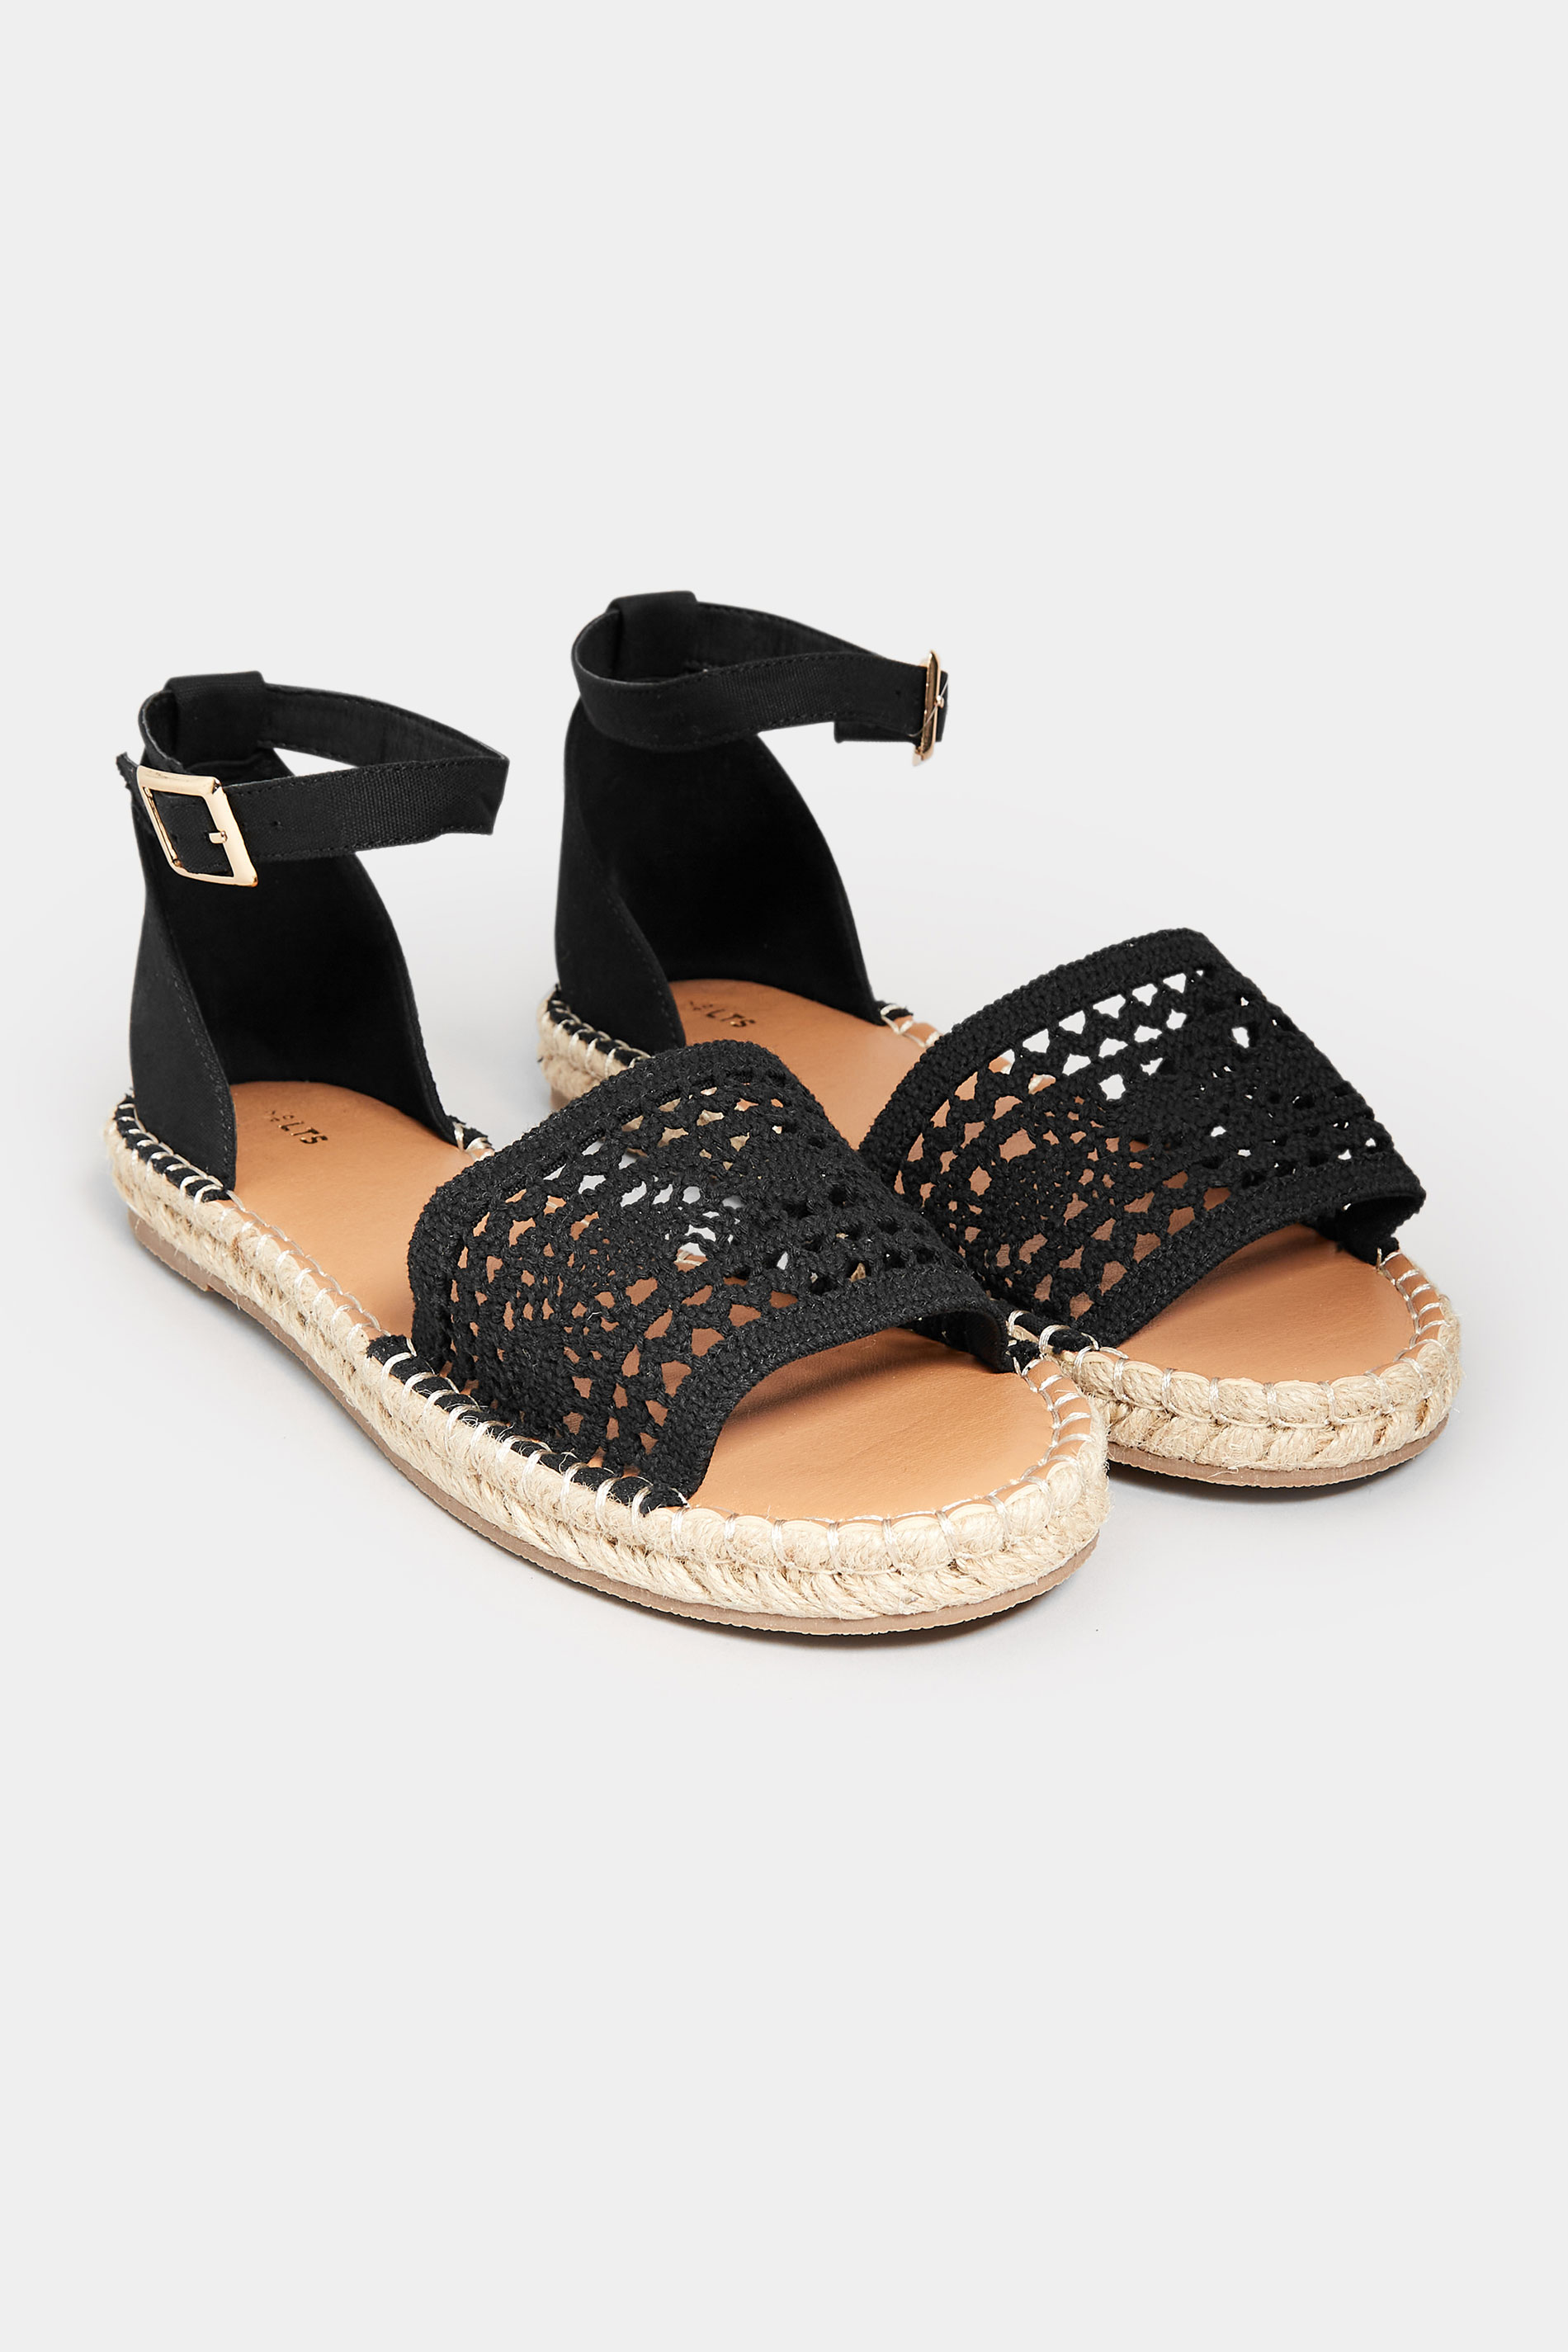 LTS Black Espadrille Sandals In Standard Fit | Long Tall Sally  2